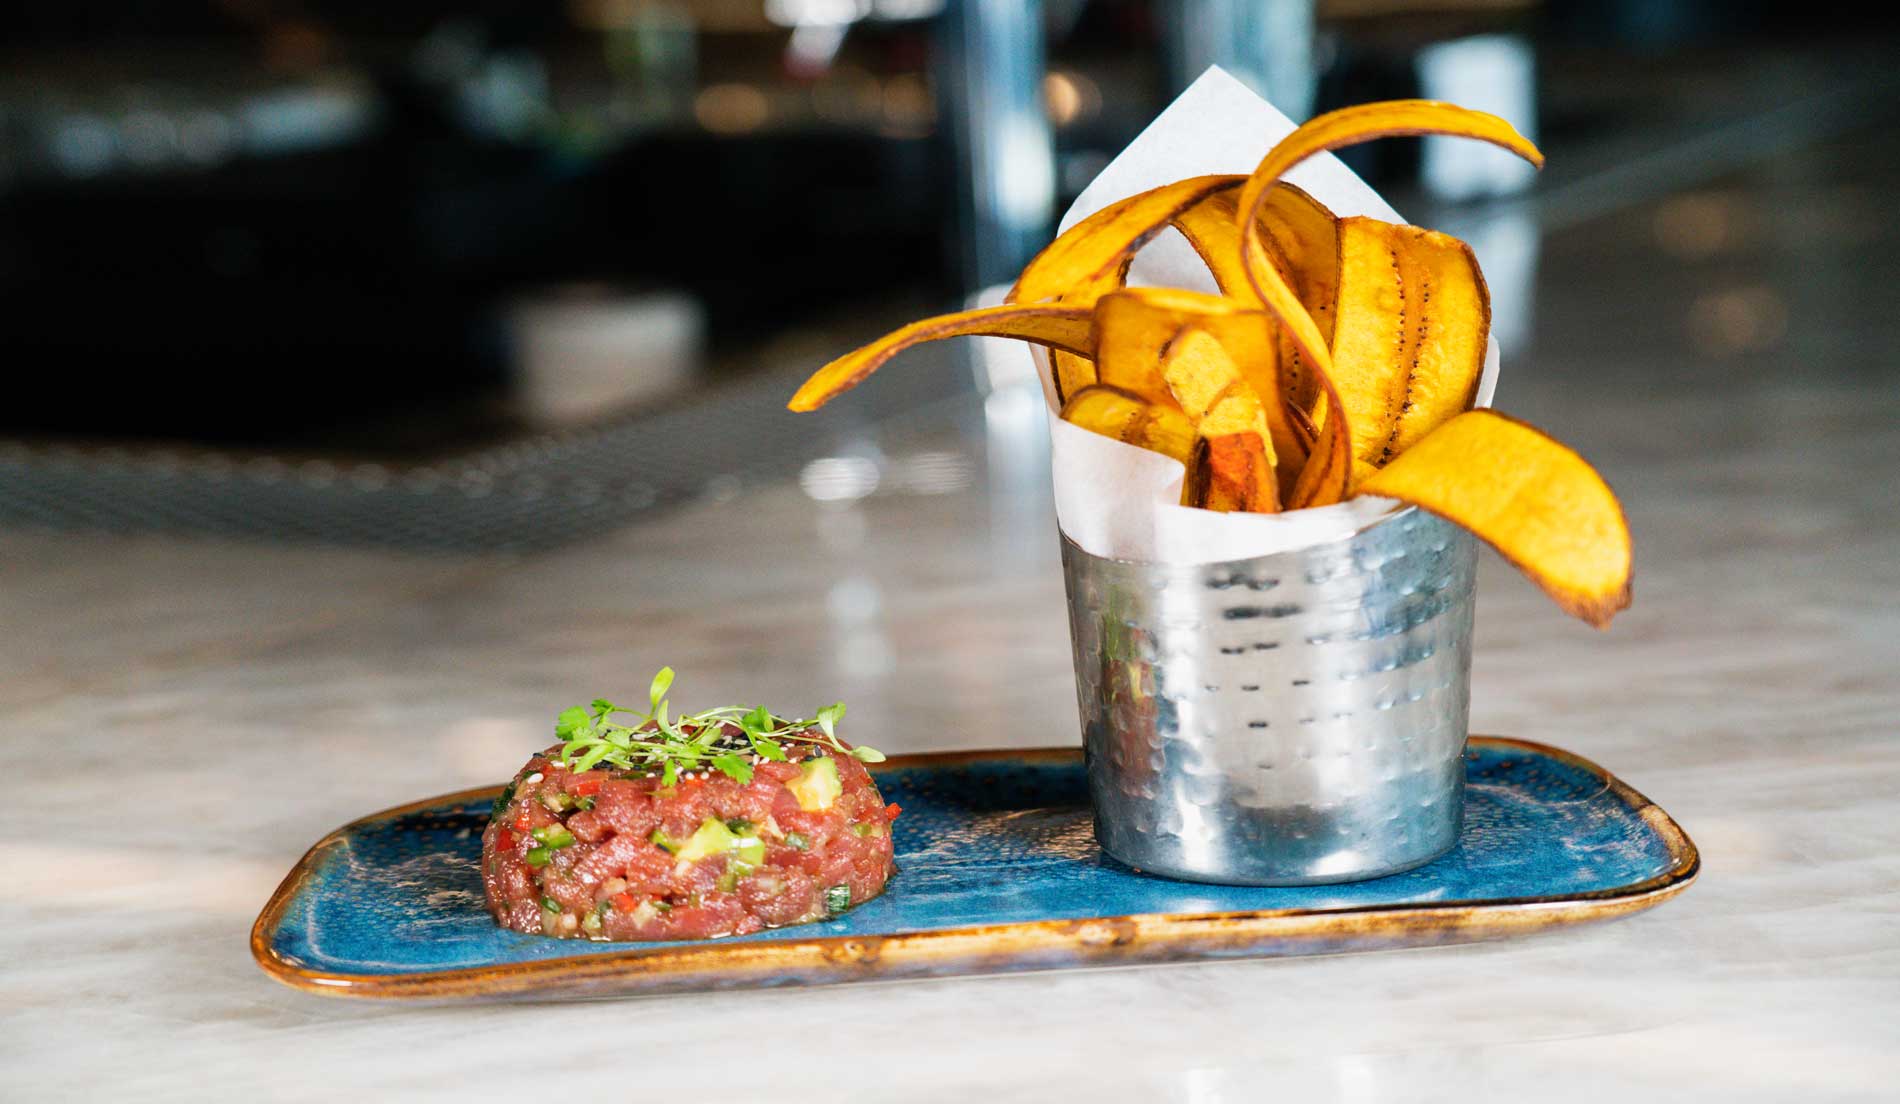 Dine on Tuna Tartare at our Bar Tasting Event in College Station TX